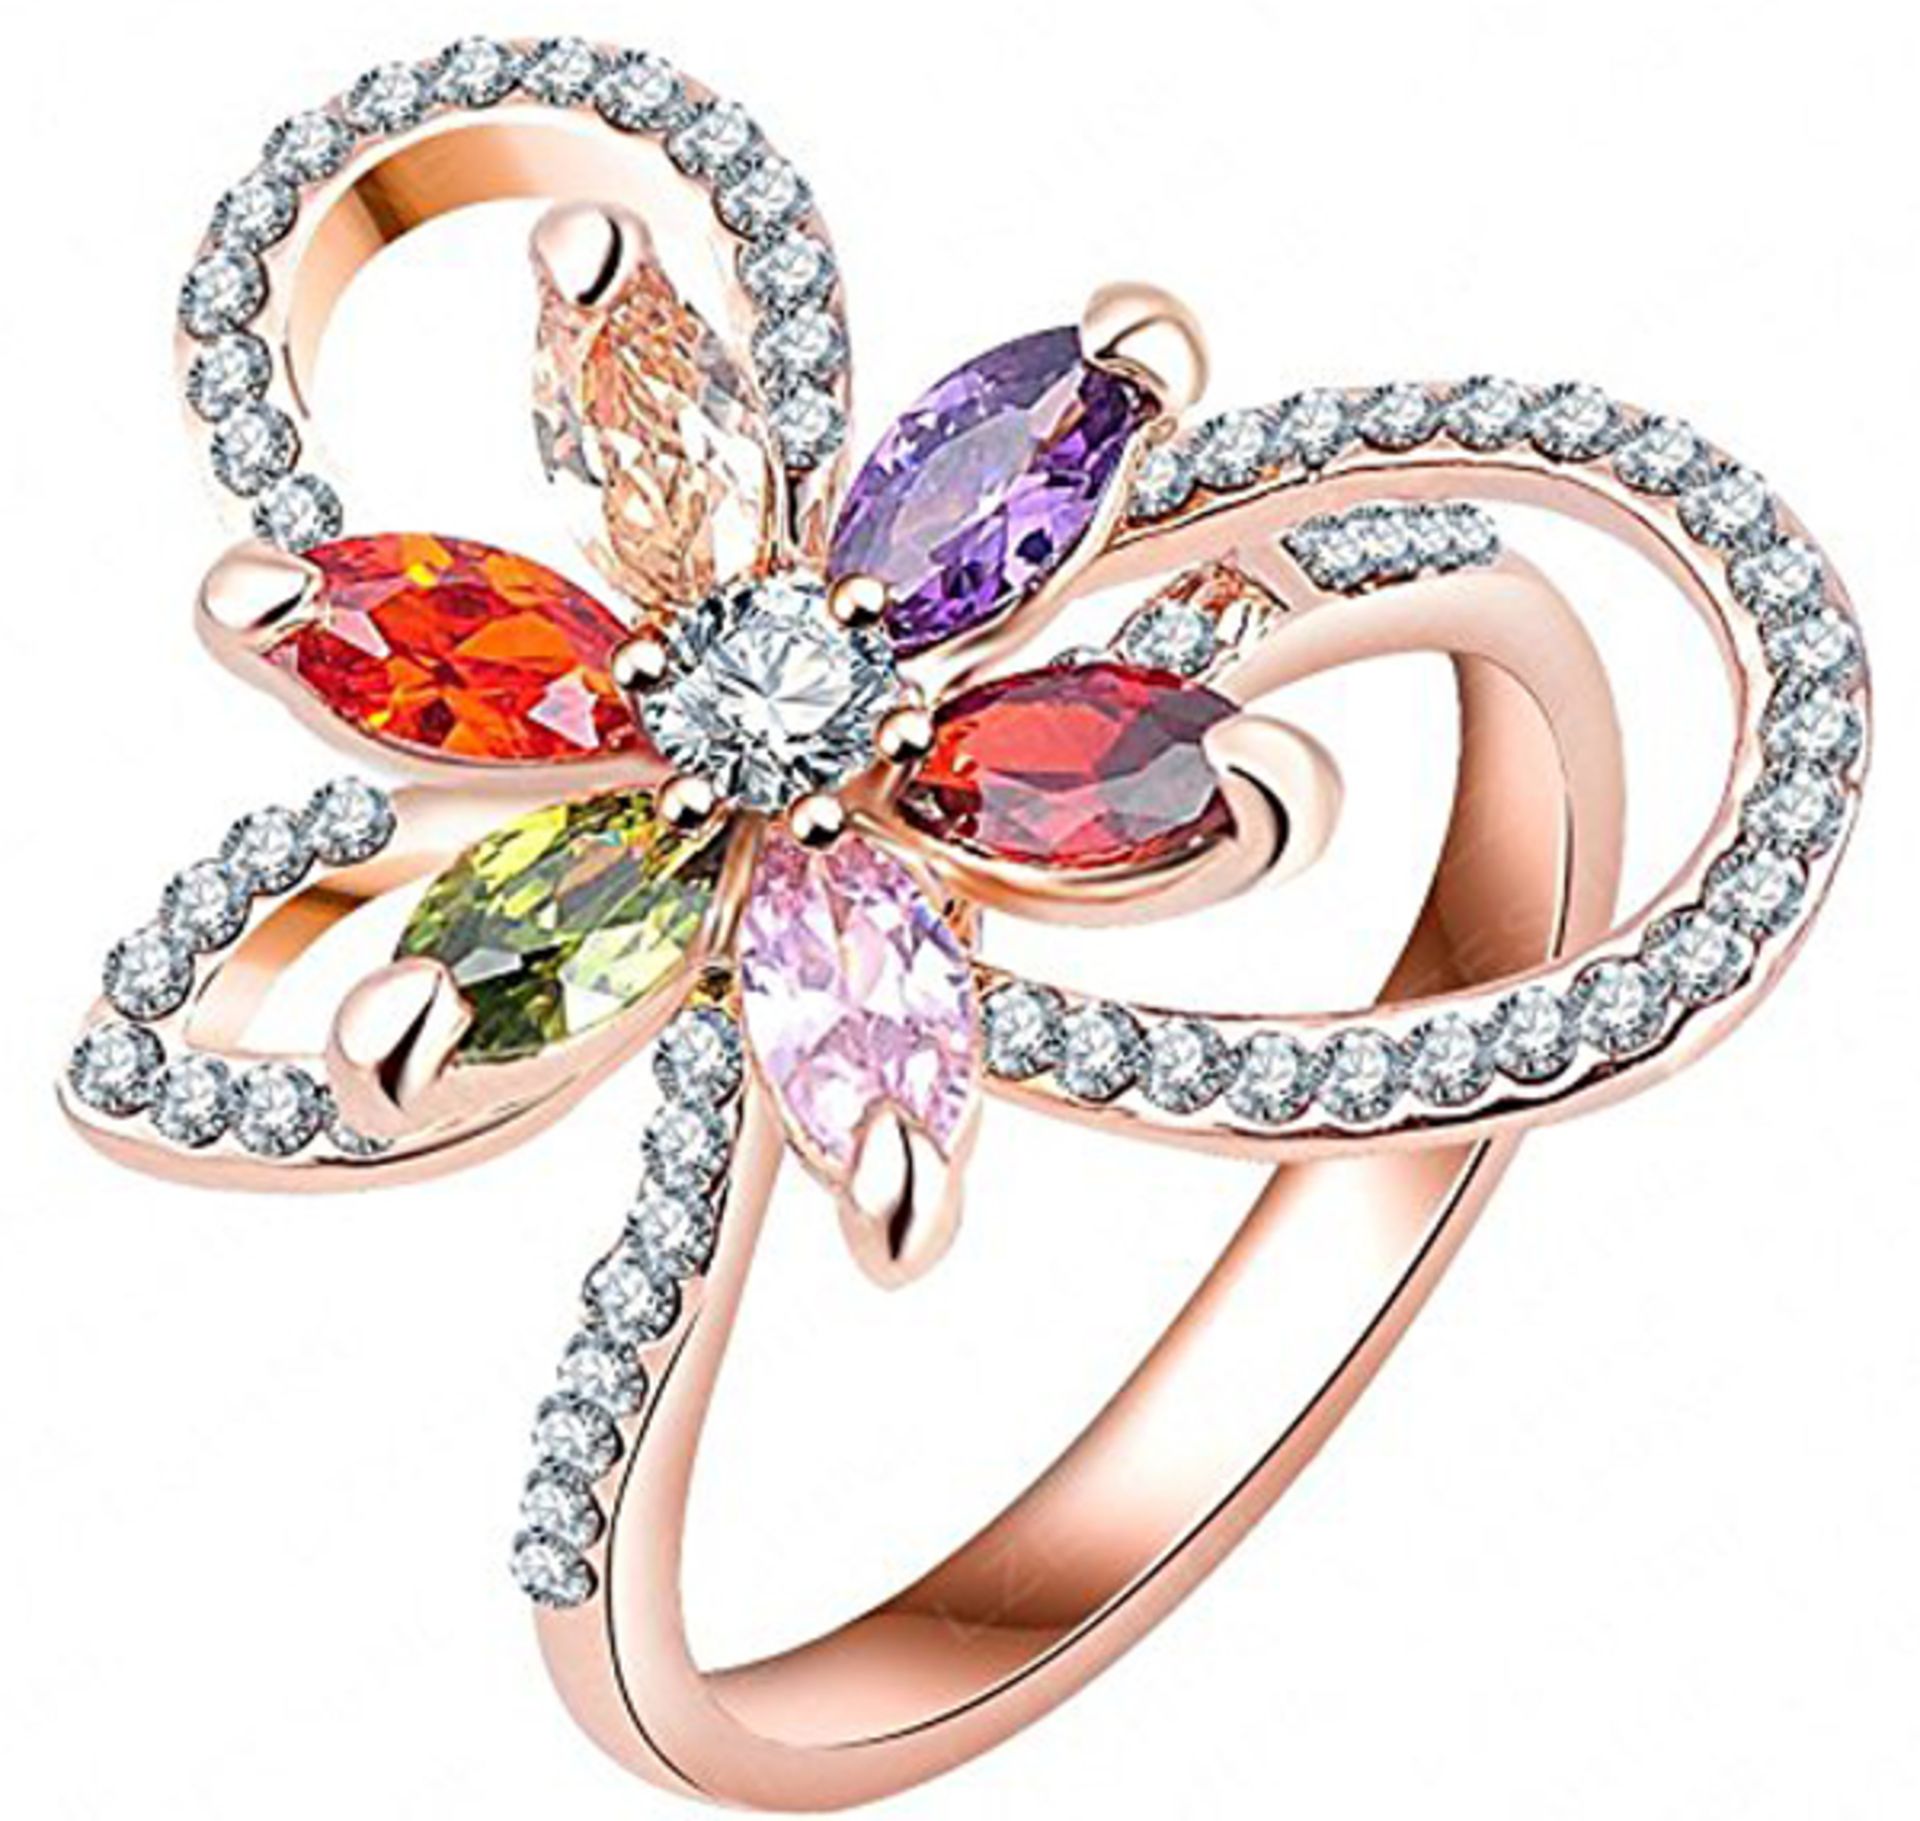 V Brand New Rose Colour Flower Shape Multi Stone Cocktail ring X 2 YOUR BID PRICE TO BE MULTIPLIED